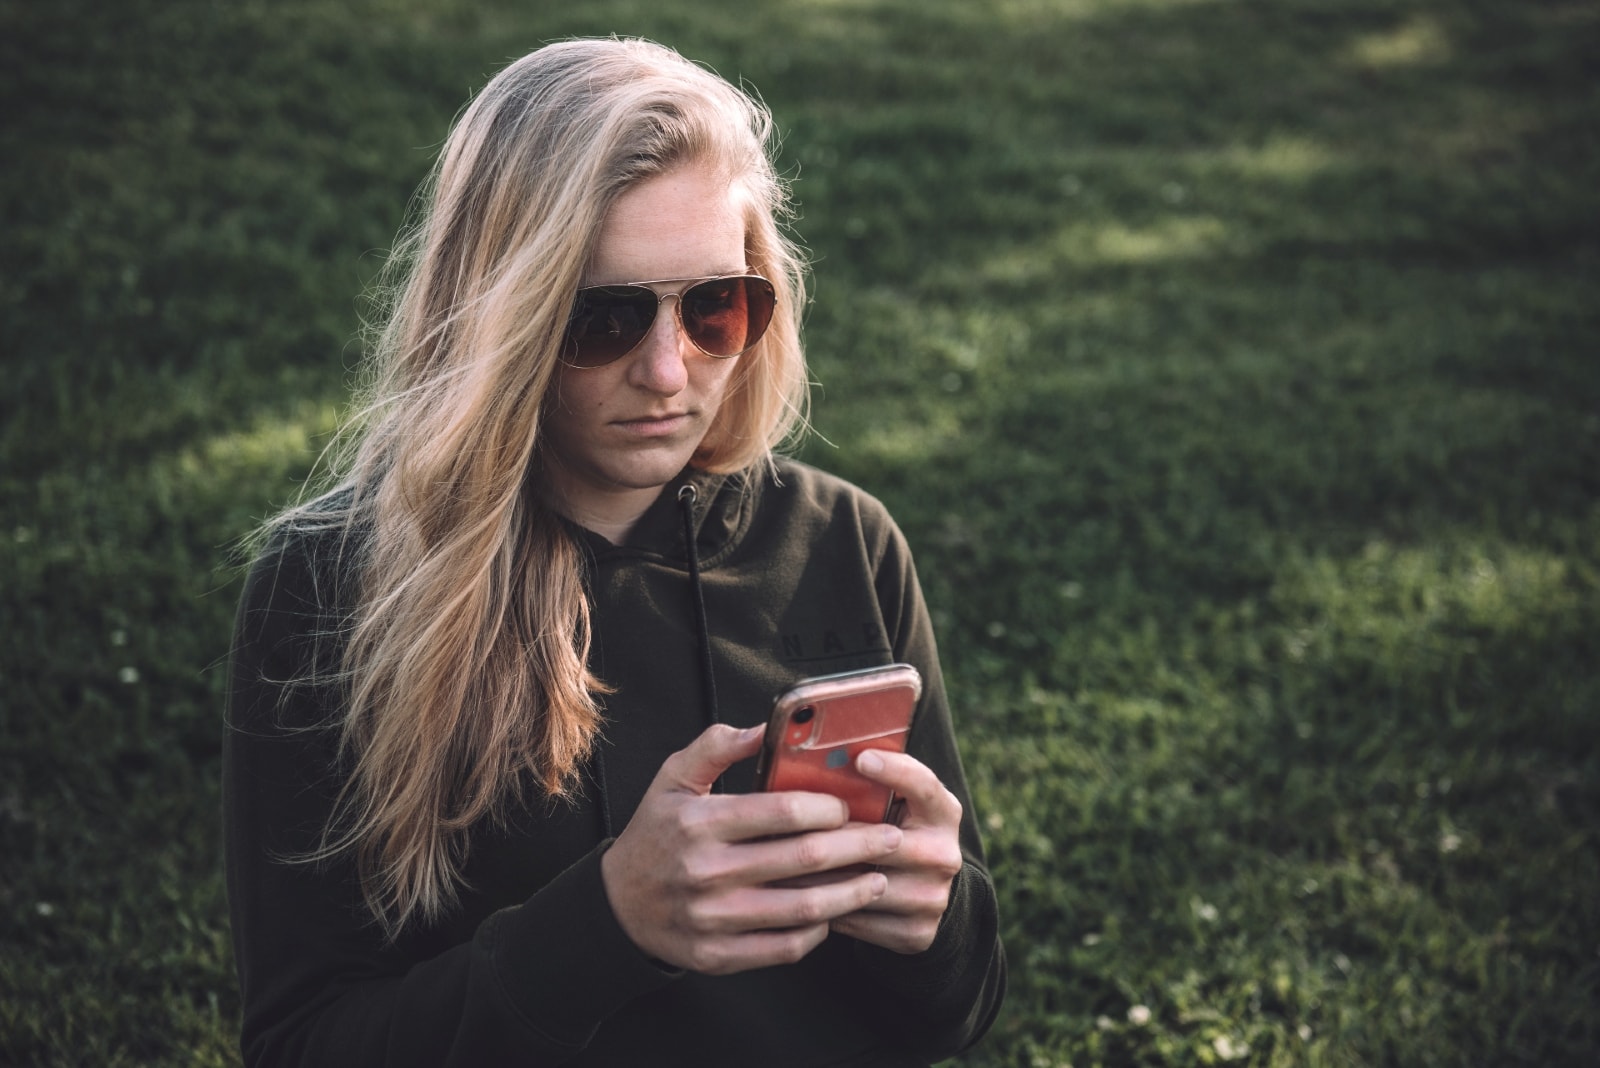 blonde woman with sunglasses looking at phone outdoor